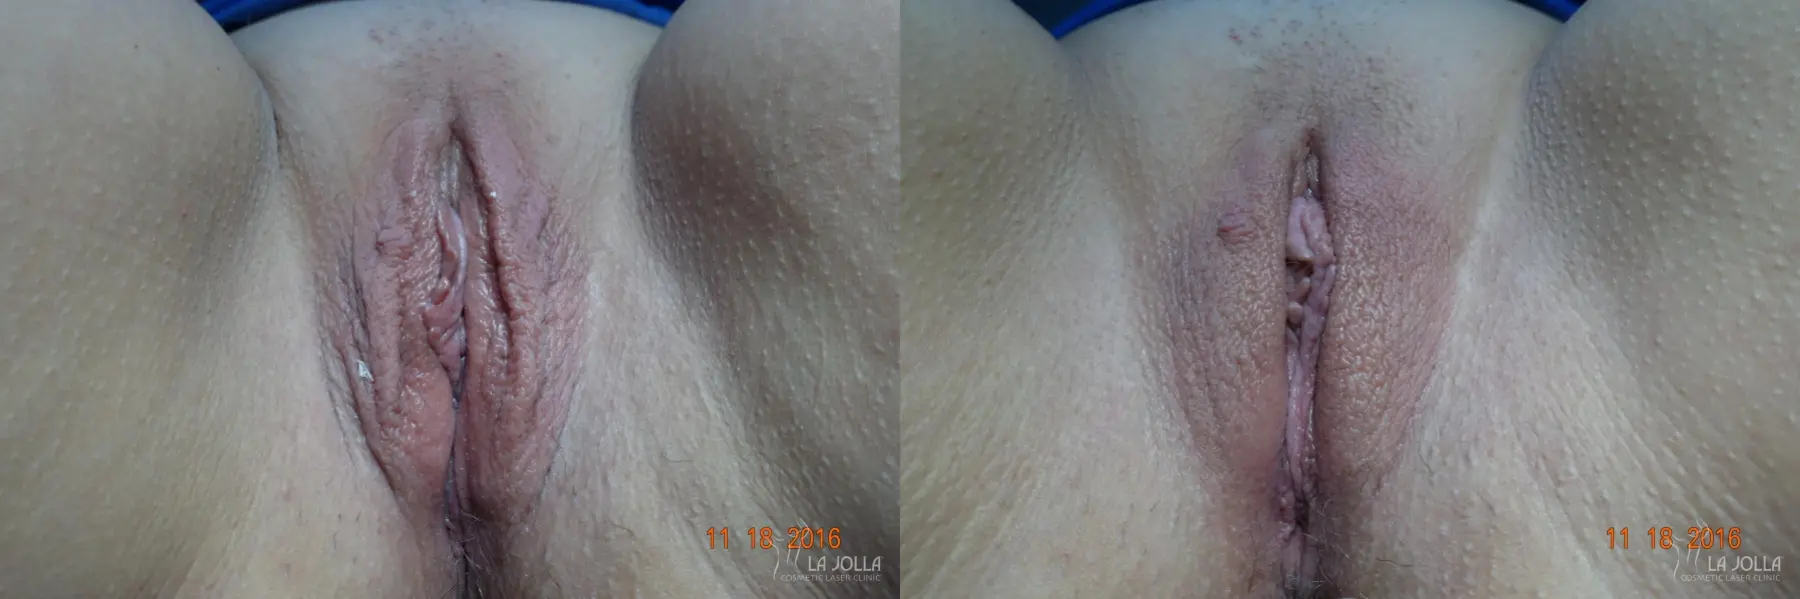 ThermiVa®: Patient 3 - Before and After 1